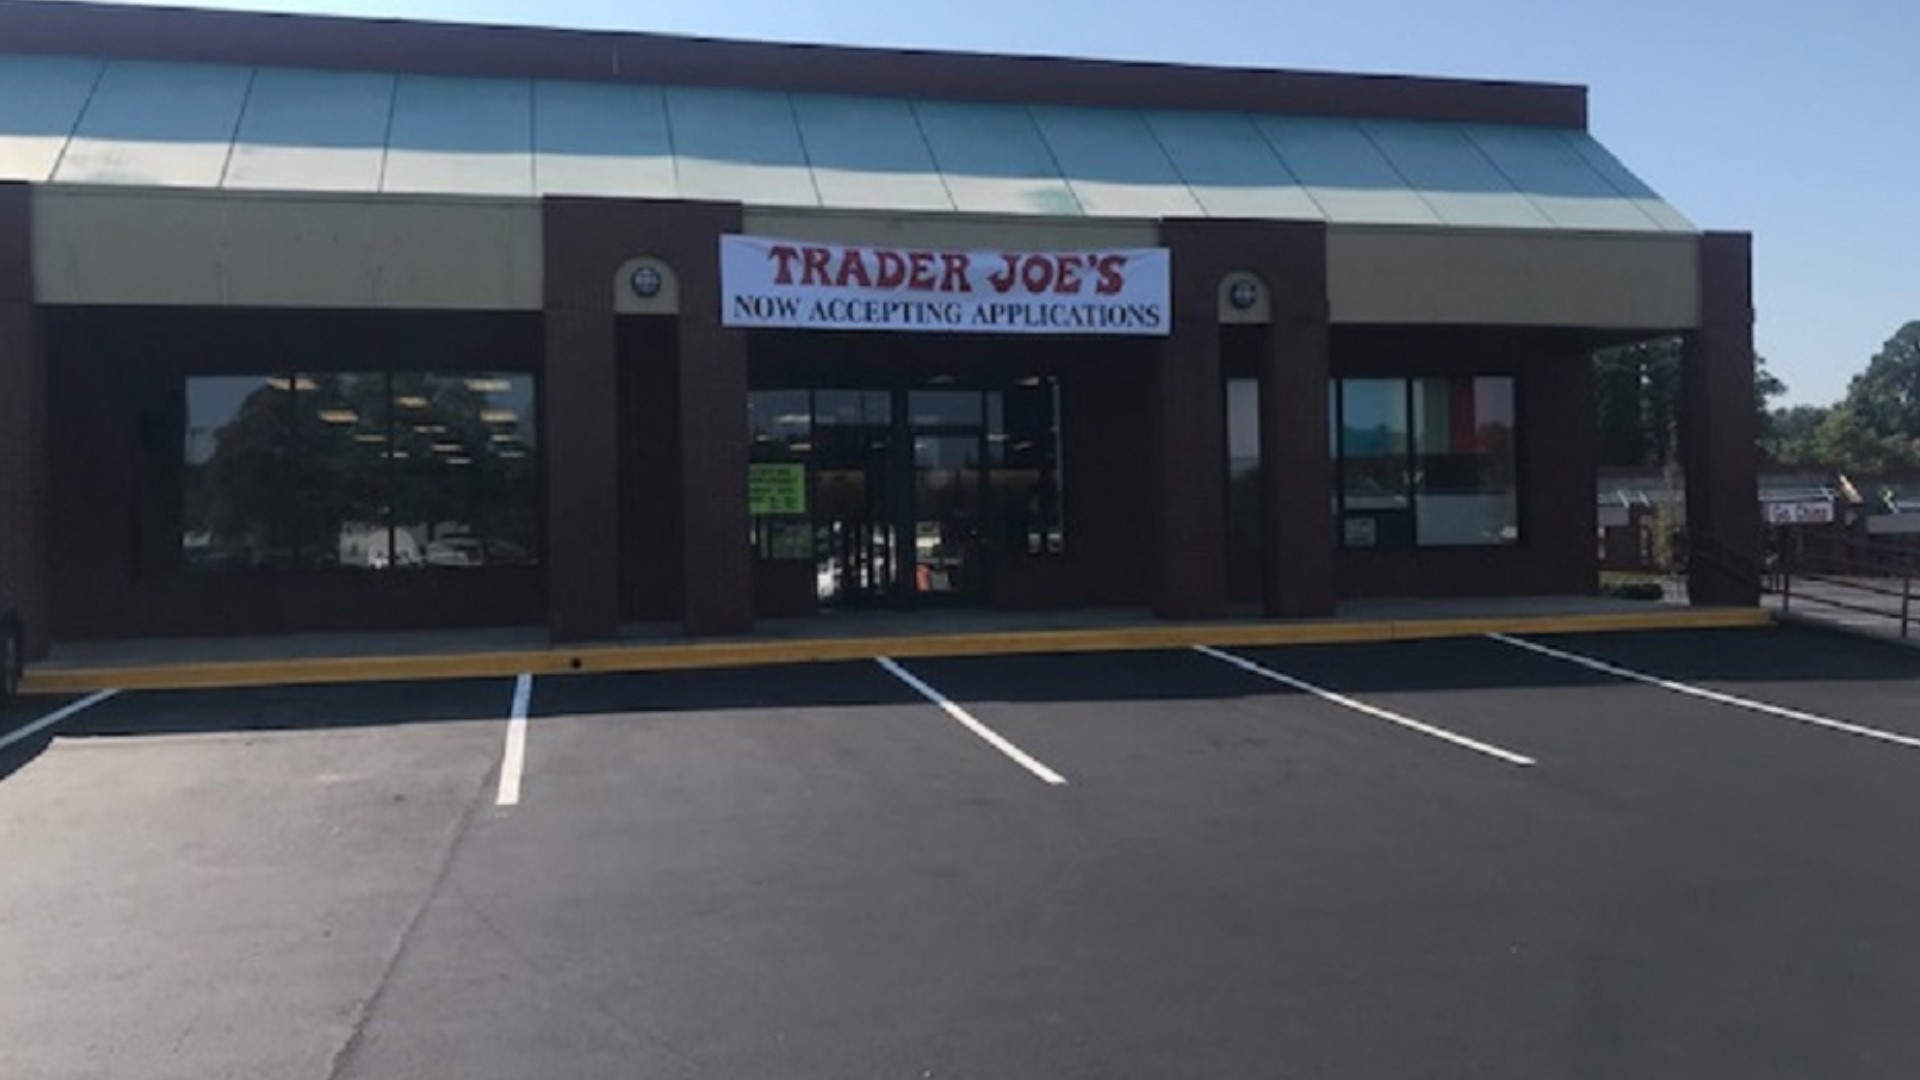 A Trader Joe’s spokesperson said an exact date for the grand opening of the Greensboro store has not been decided.